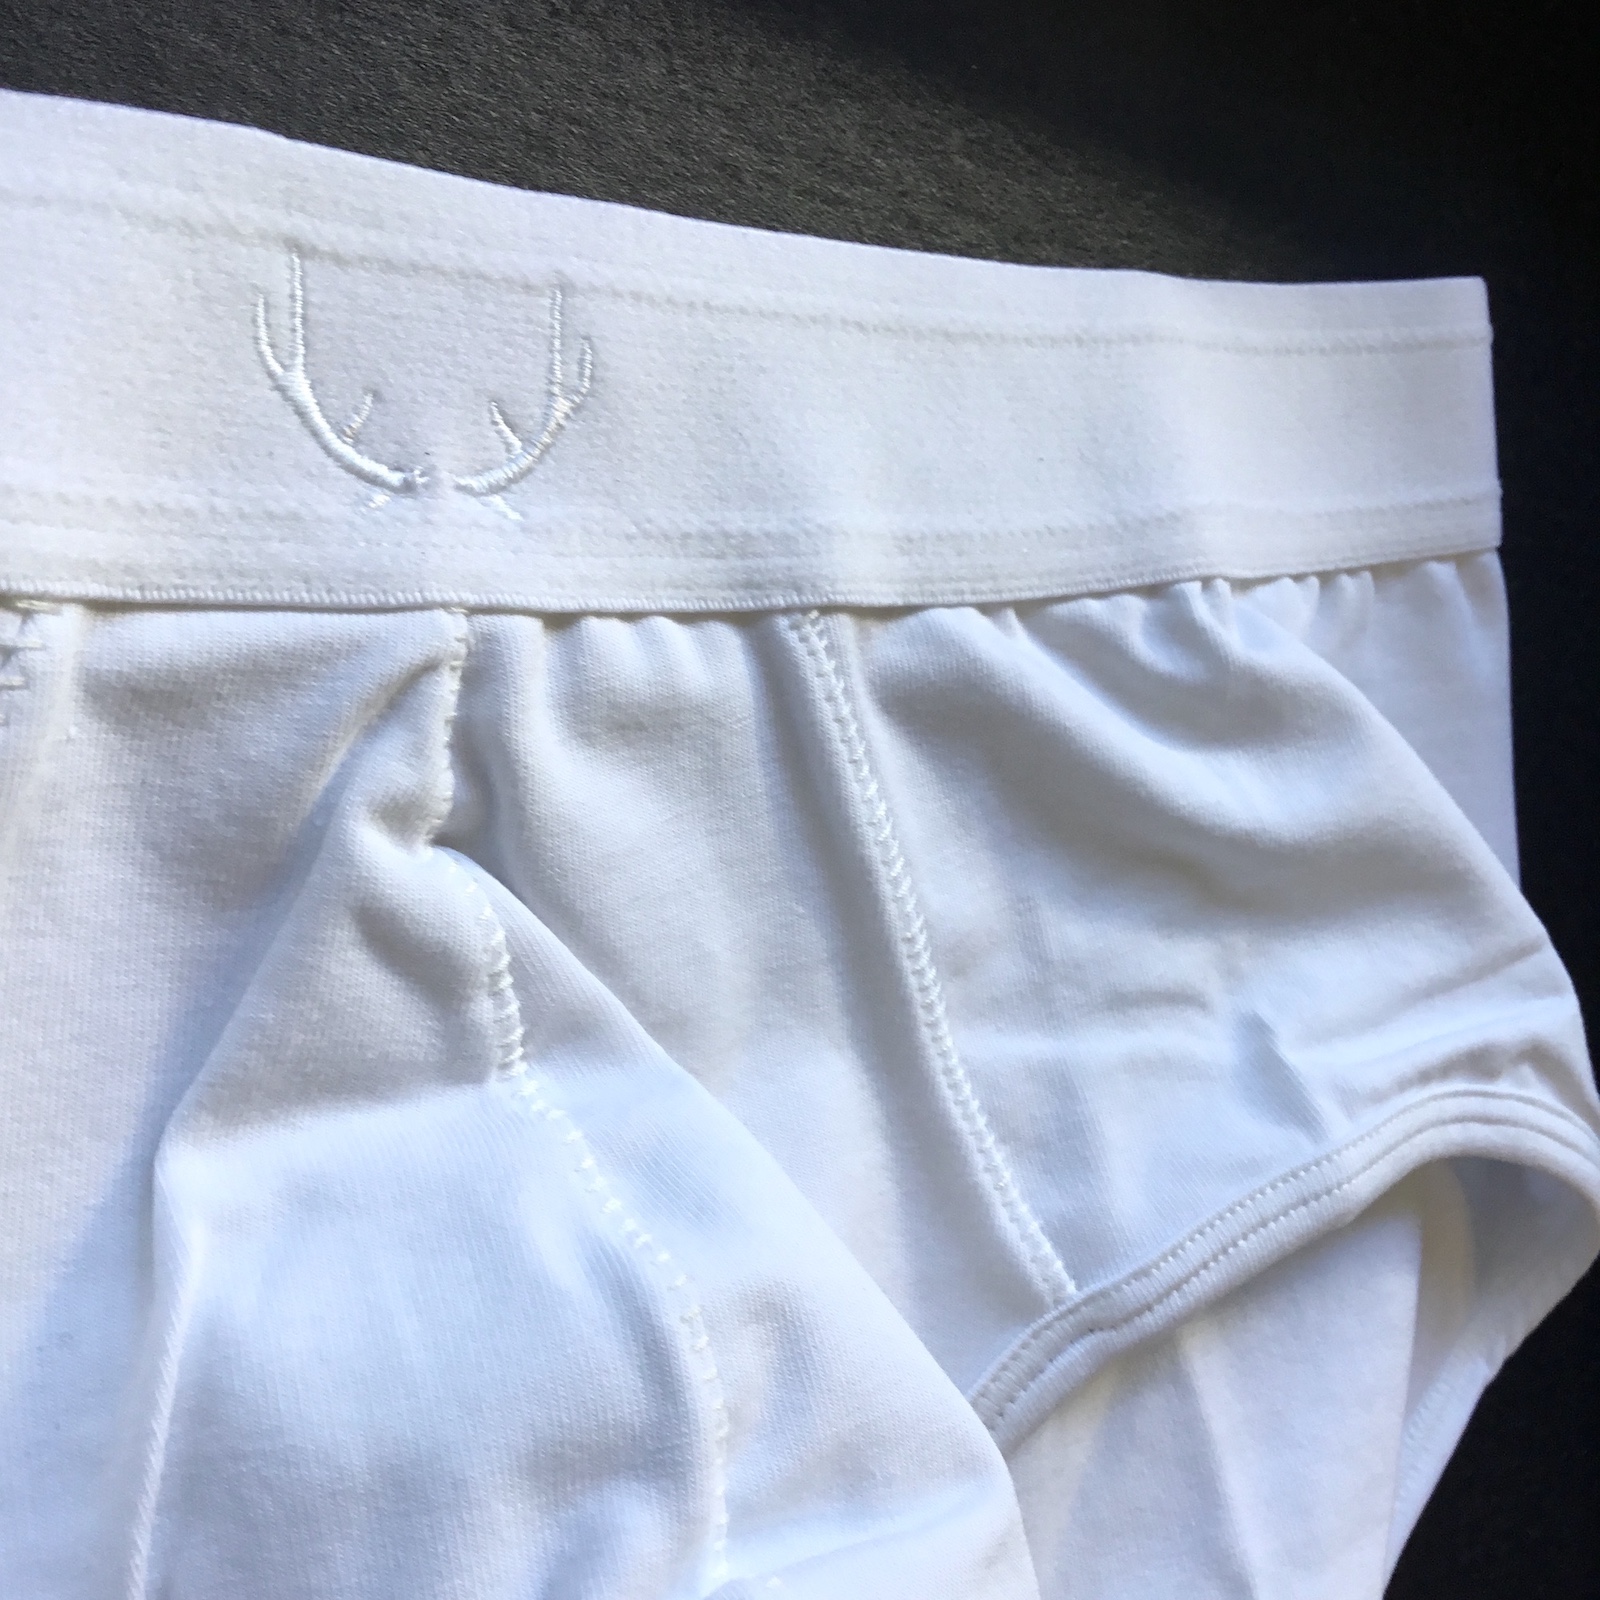 Triple White Briefs and Trunks by Bluebuck | Men and underwear